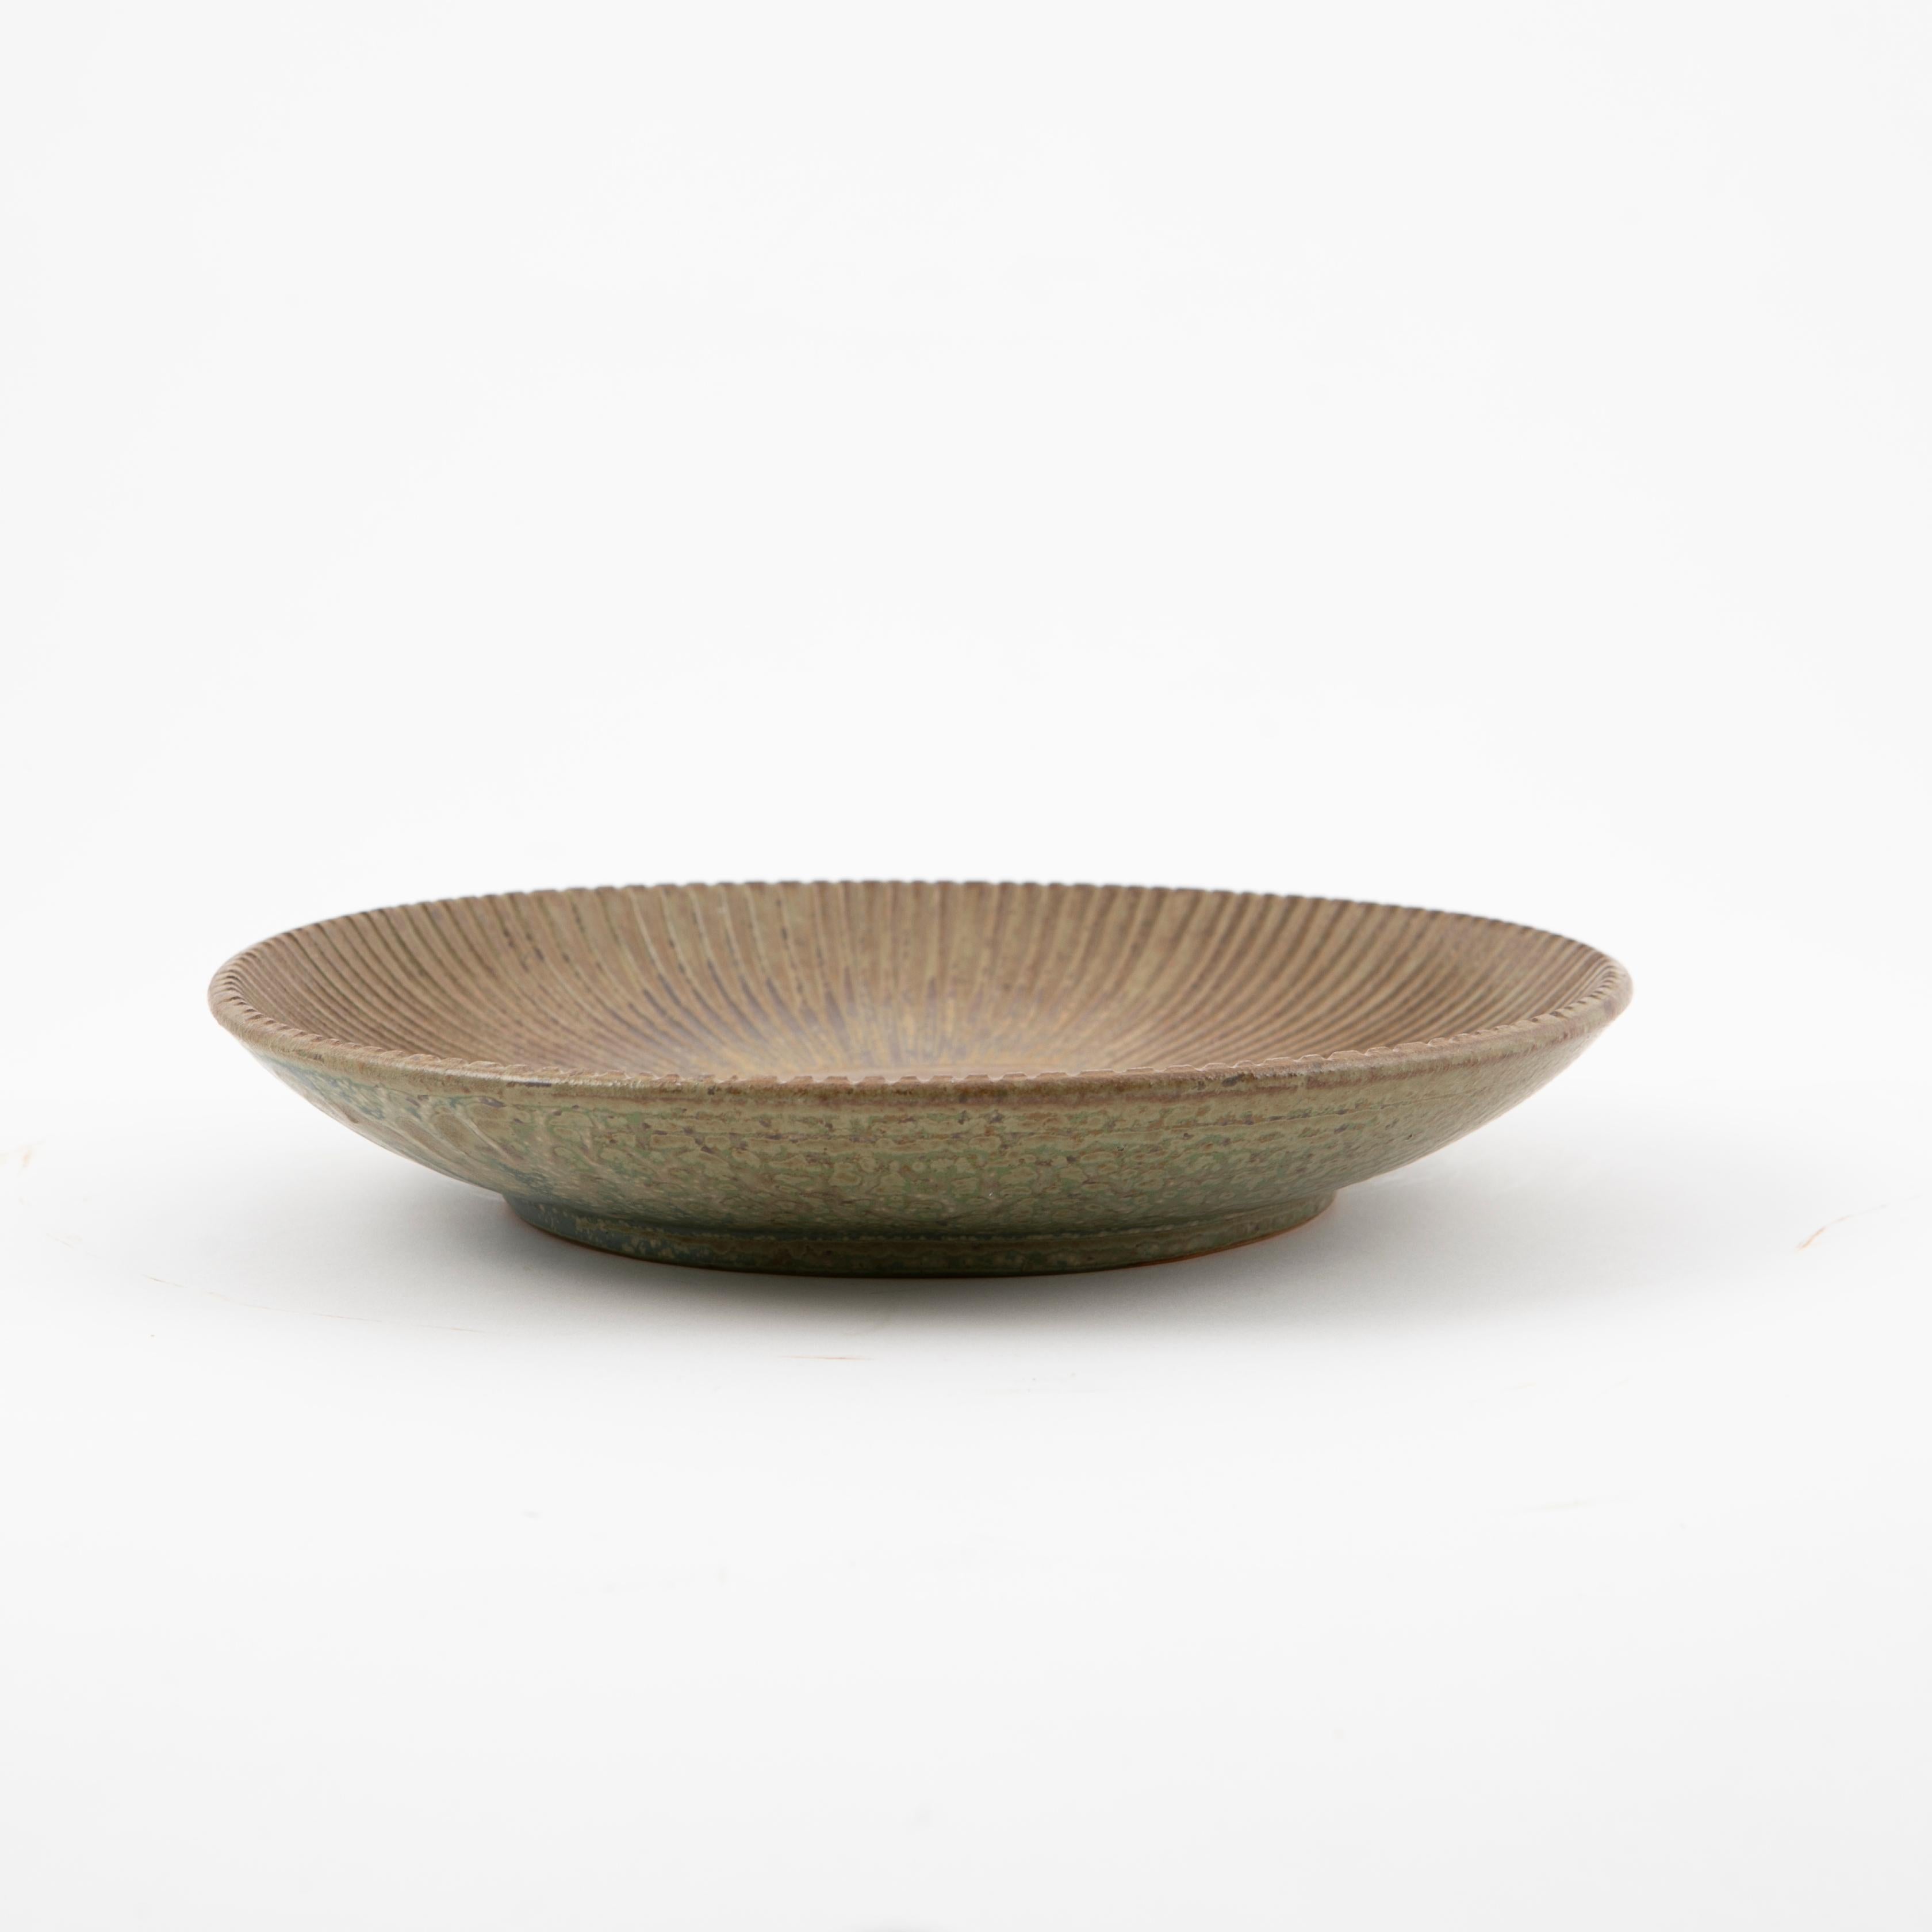 Arne Bang (Danish, 1901-1983)
Ribbed stoneware dish in earthy green glazing. Outer surface in shades of brown, green and cyan. Model no. 91.
In perfect condition. 
Signed with monogram AB.
Denmark 1940's.